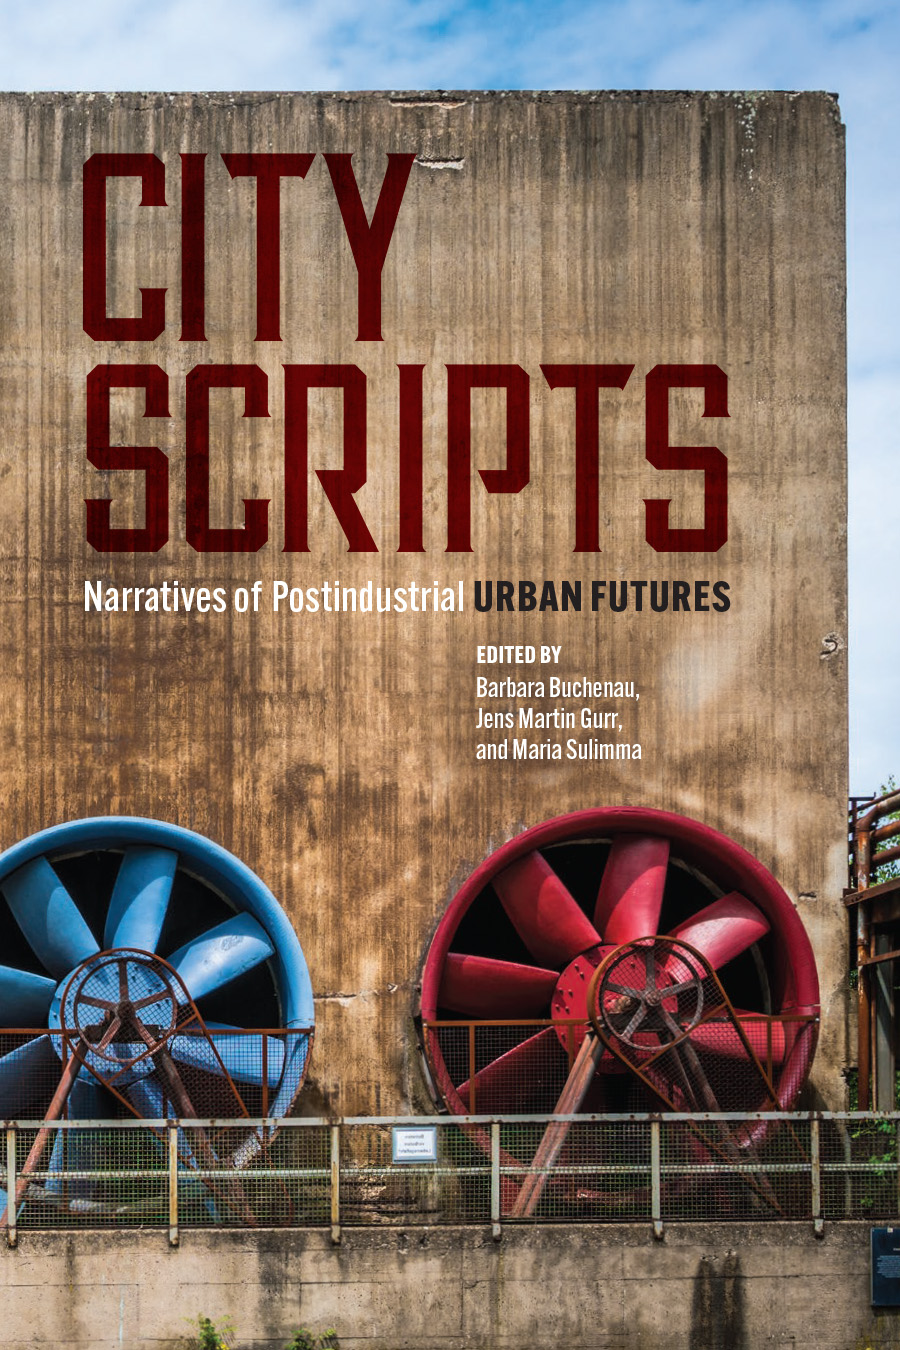 Front cover of City Scripts: Narratives of Postindustrial Urban Futures, edited by Barbara Buchenau, Jens Martin Gurr, and Maria Sulimma, featuring a tall concrete wall, set with two large industrial fans, one red and one blue.